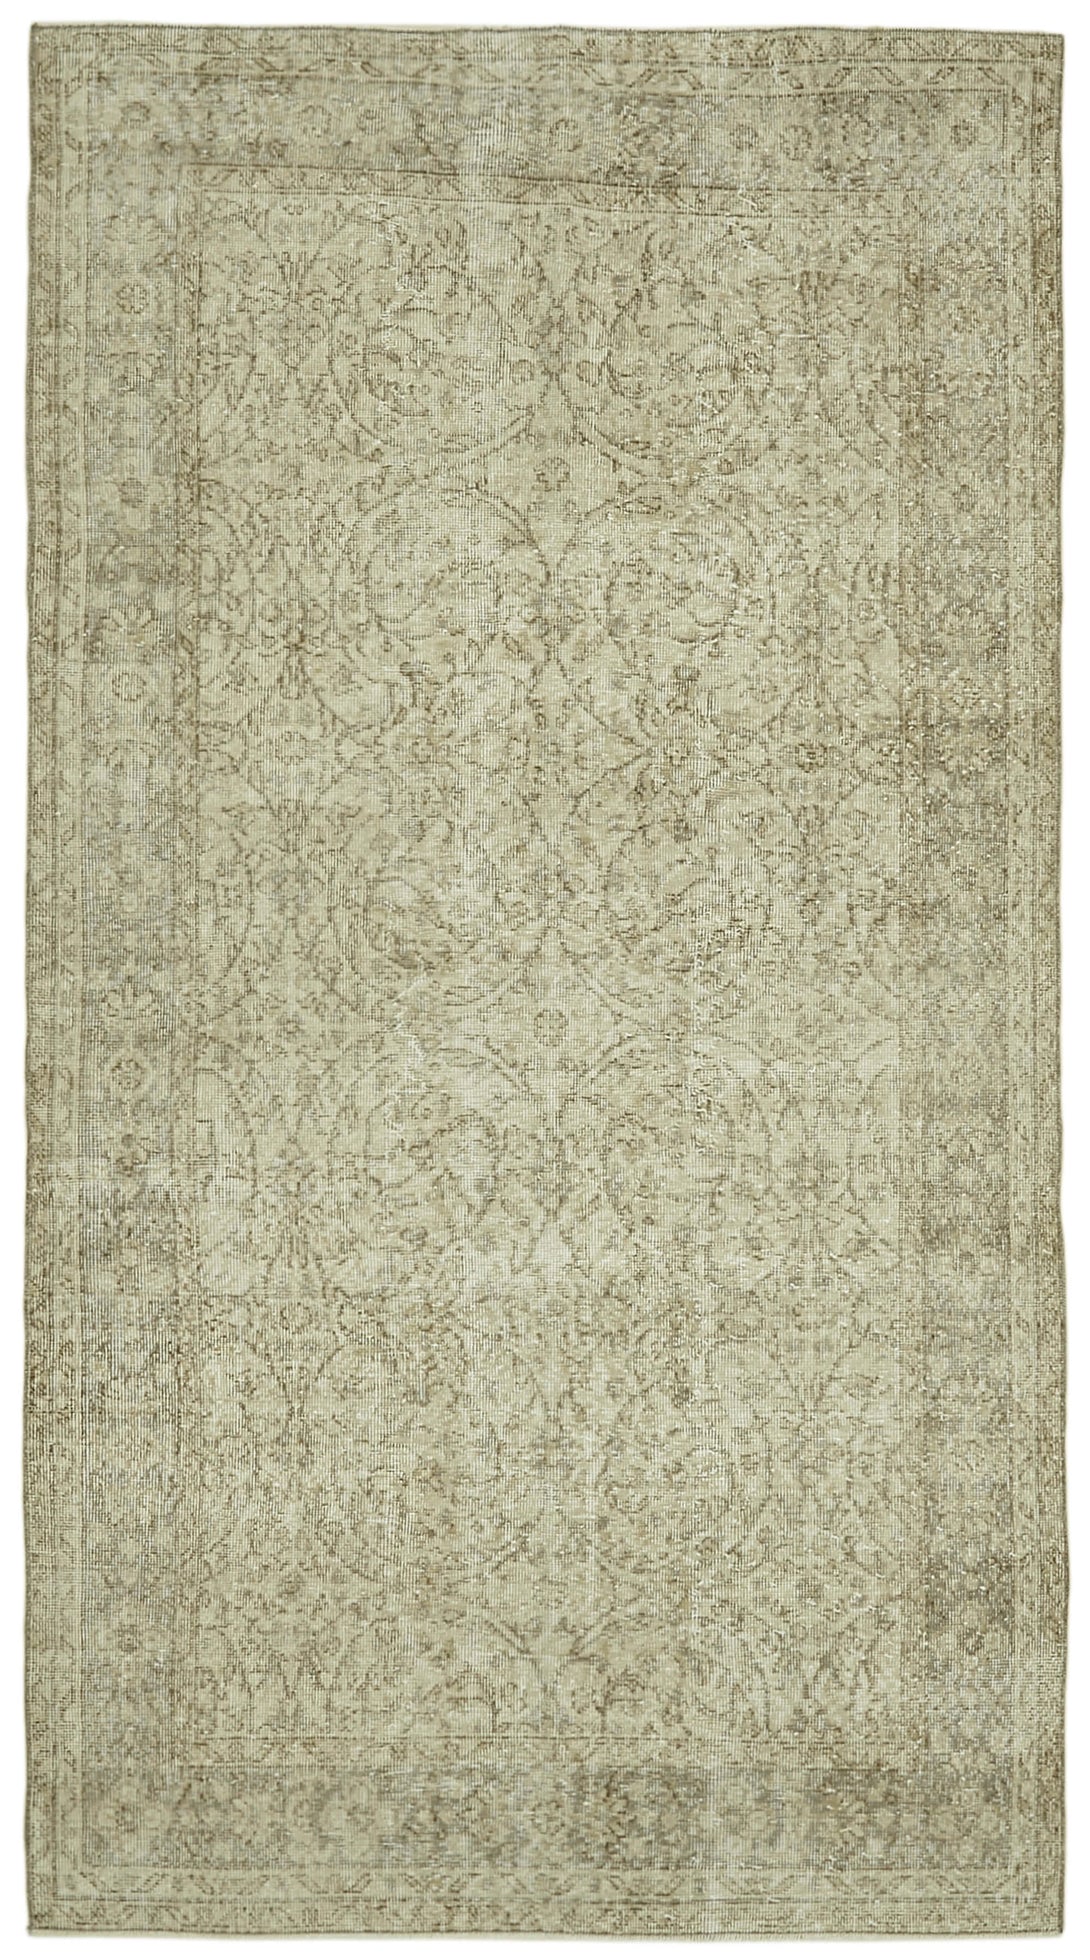 Handmade White Wash Area Rug > Design# OL-AC-41472 > Size: 5'-0" x 9'-3", Carpet Culture Rugs, Handmade Rugs, NYC Rugs, New Rugs, Shop Rugs, Rug Store, Outlet Rugs, SoHo Rugs, Rugs in USA